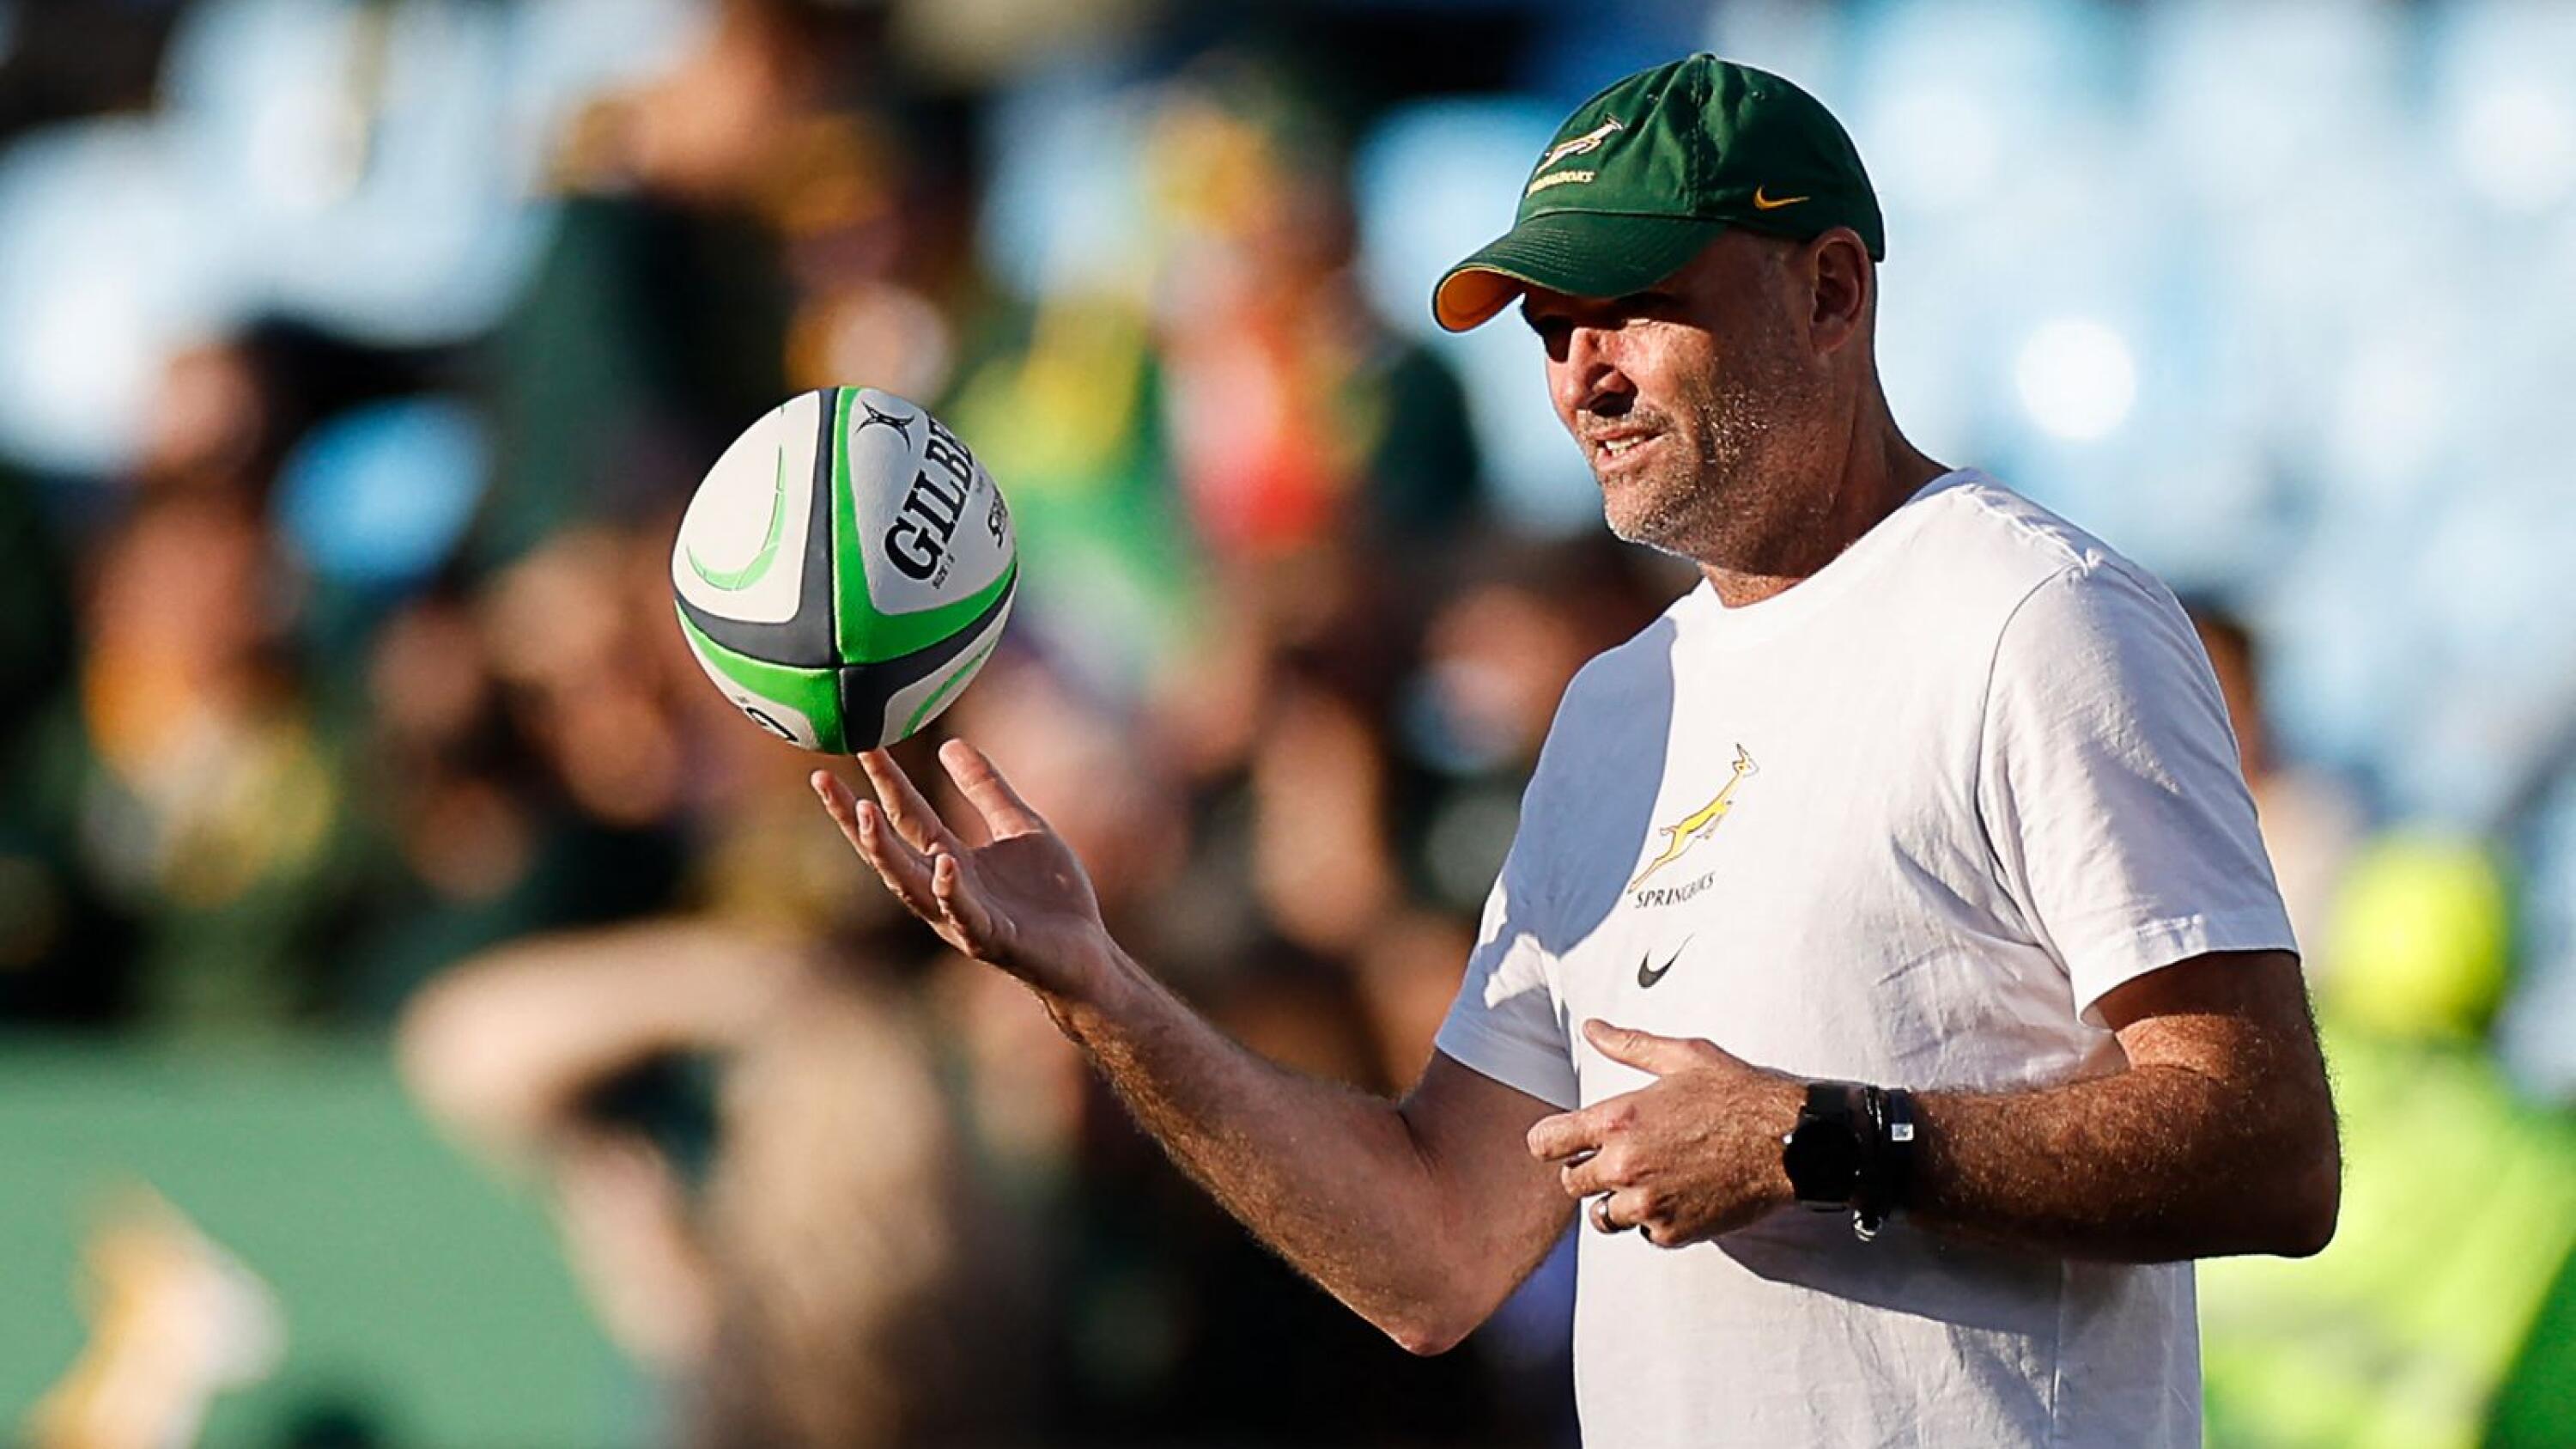 South Africa's coach Jacques Nienaber holds a ball during warm up prior to the Rugby Championship first round match between South Africa and Australia at Loftus Versfeld stadium in Pretoria